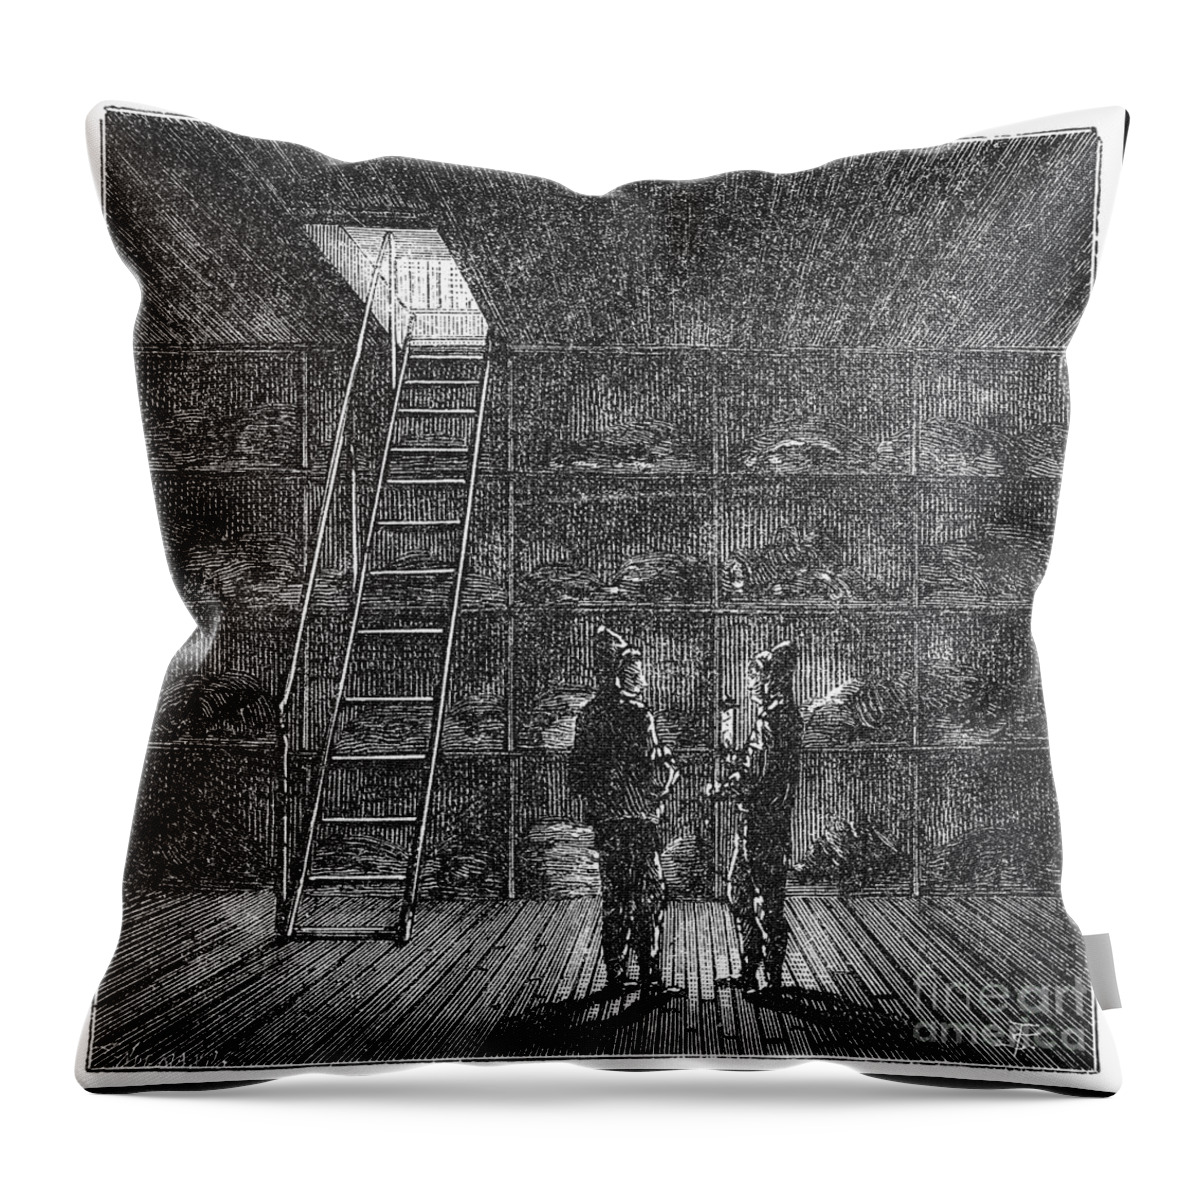 1876 Throw Pillow featuring the photograph Refrigerated Ship, 1876 #1 by Granger